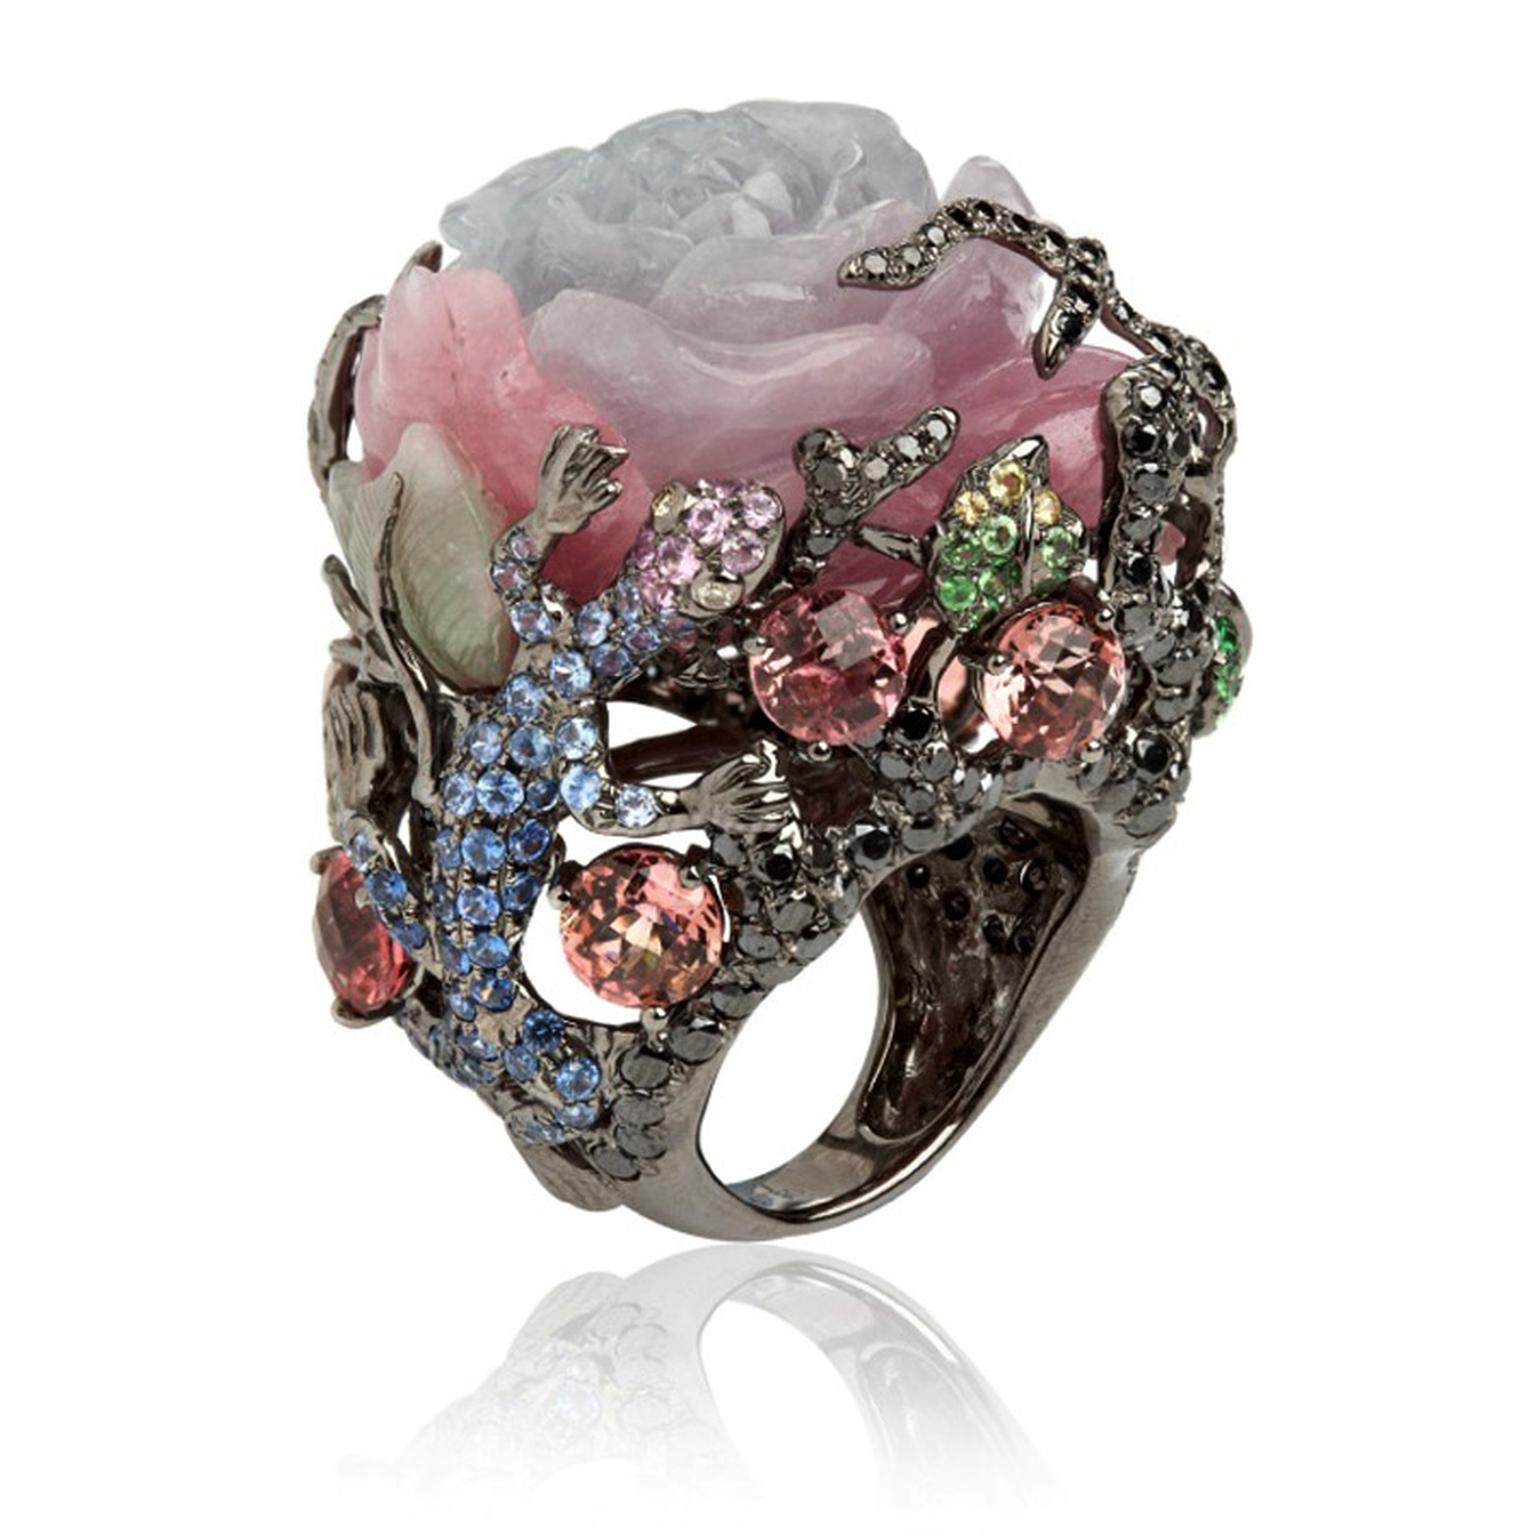 Wendy-Yue-Fantasie-18ct-white-gold,--diamond,sapphire,garnet,jade-and-tourmaline-Dusty-Rose-ring-By-Wendy-Yue--for-Annoushka.jpg